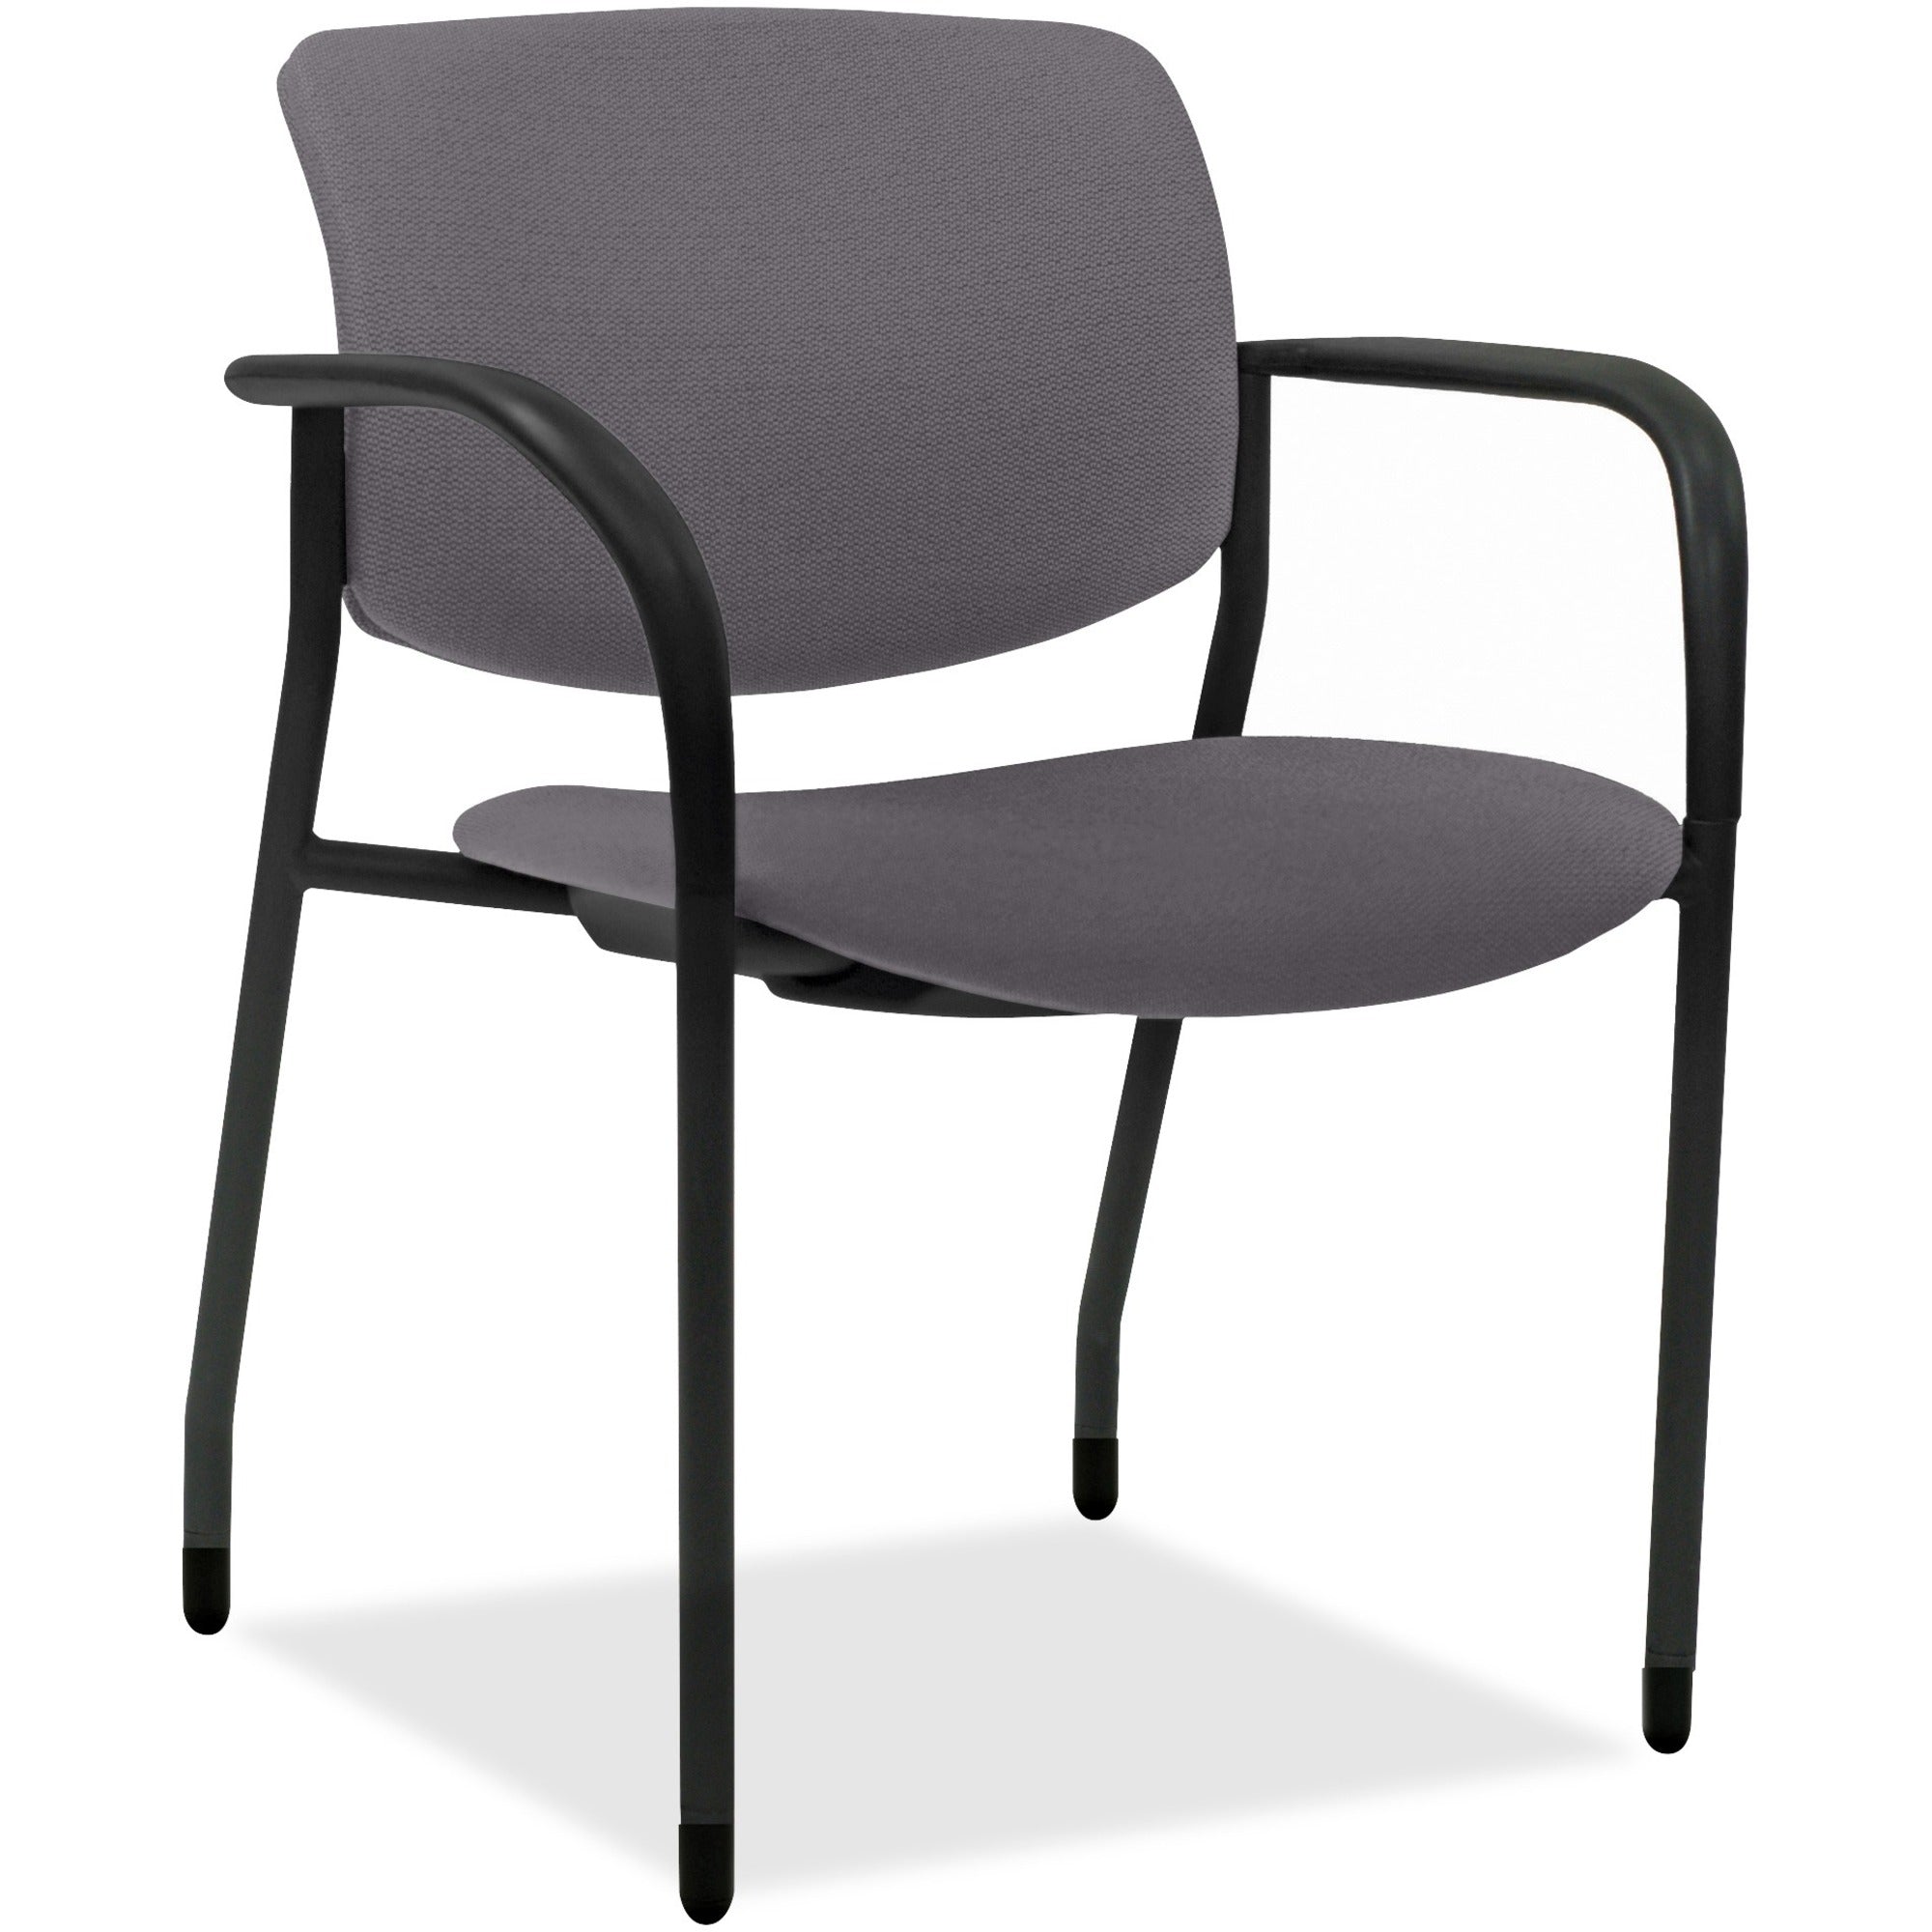 lorell-advent-upholstered-stack-chairs-with-arms-ash-foam-fabric-seat-ash-foam-fabric-back-powder-coated-black-tubular-steel-frame-four-legged-base-armrest-2-carton_llr83114a206 - 1